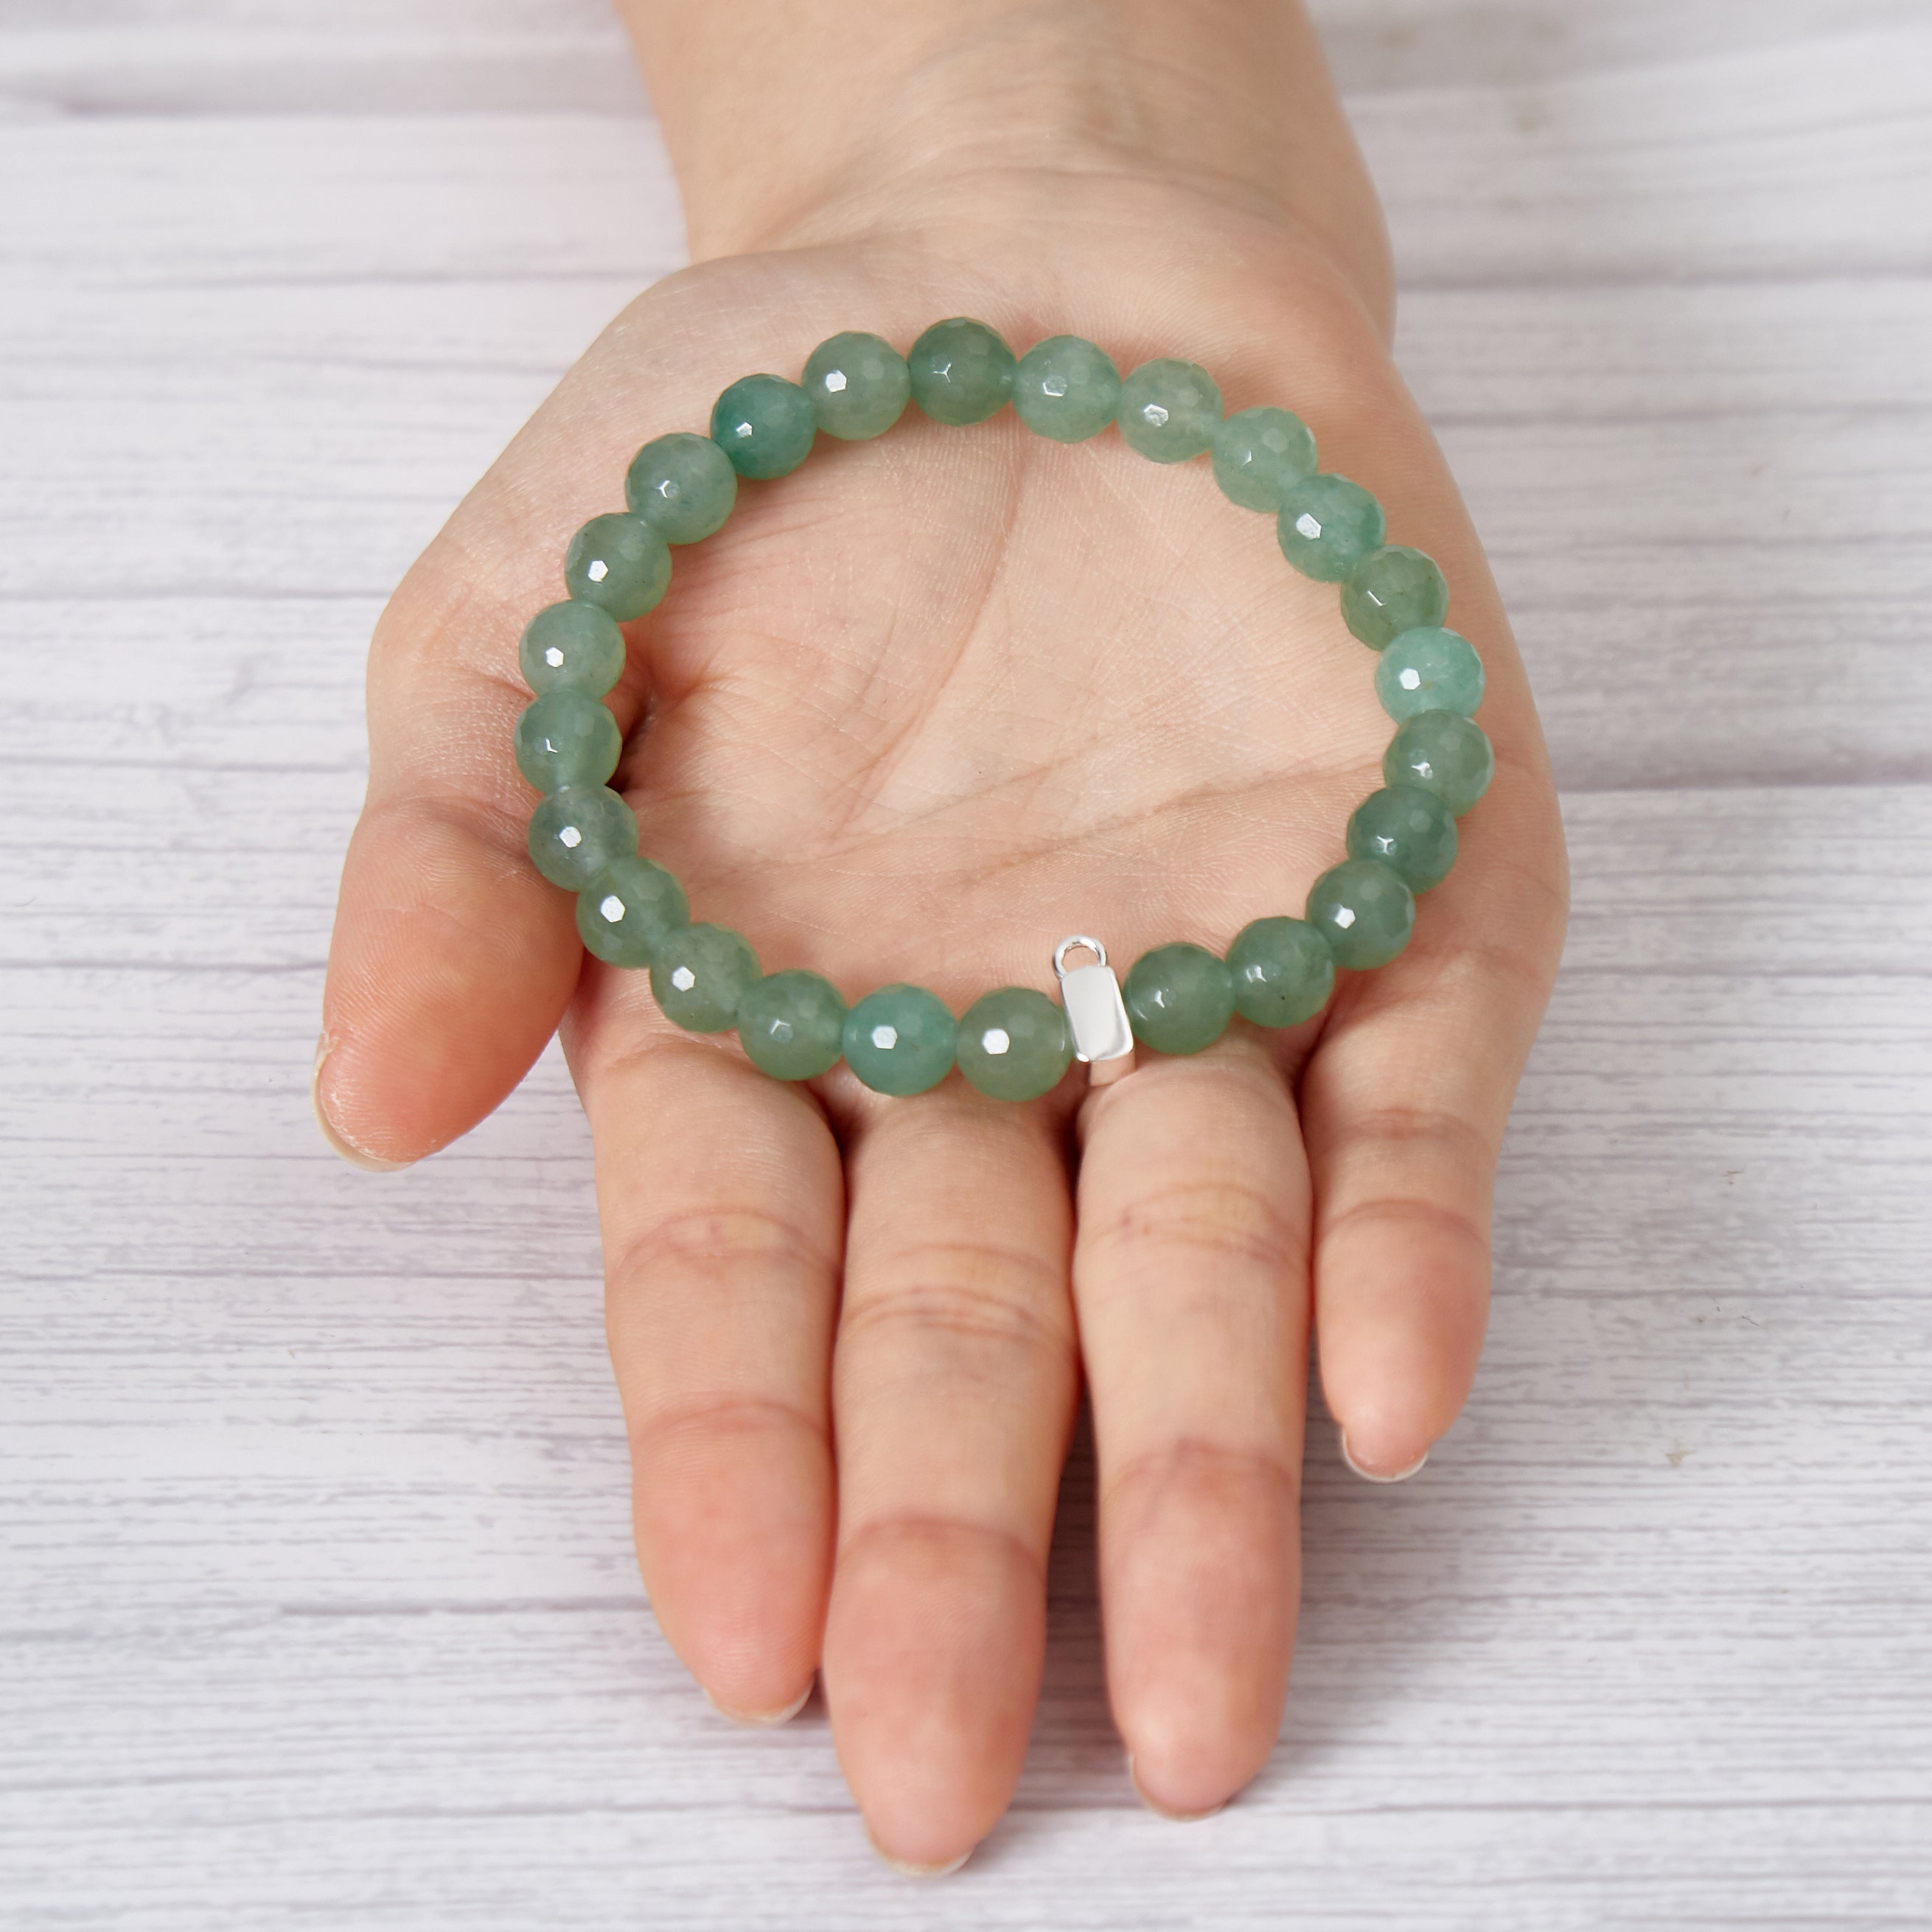 Faceted Green Aventurine Gemstone Stretch Bracelet with Charm Created with Zircondia® Crystals